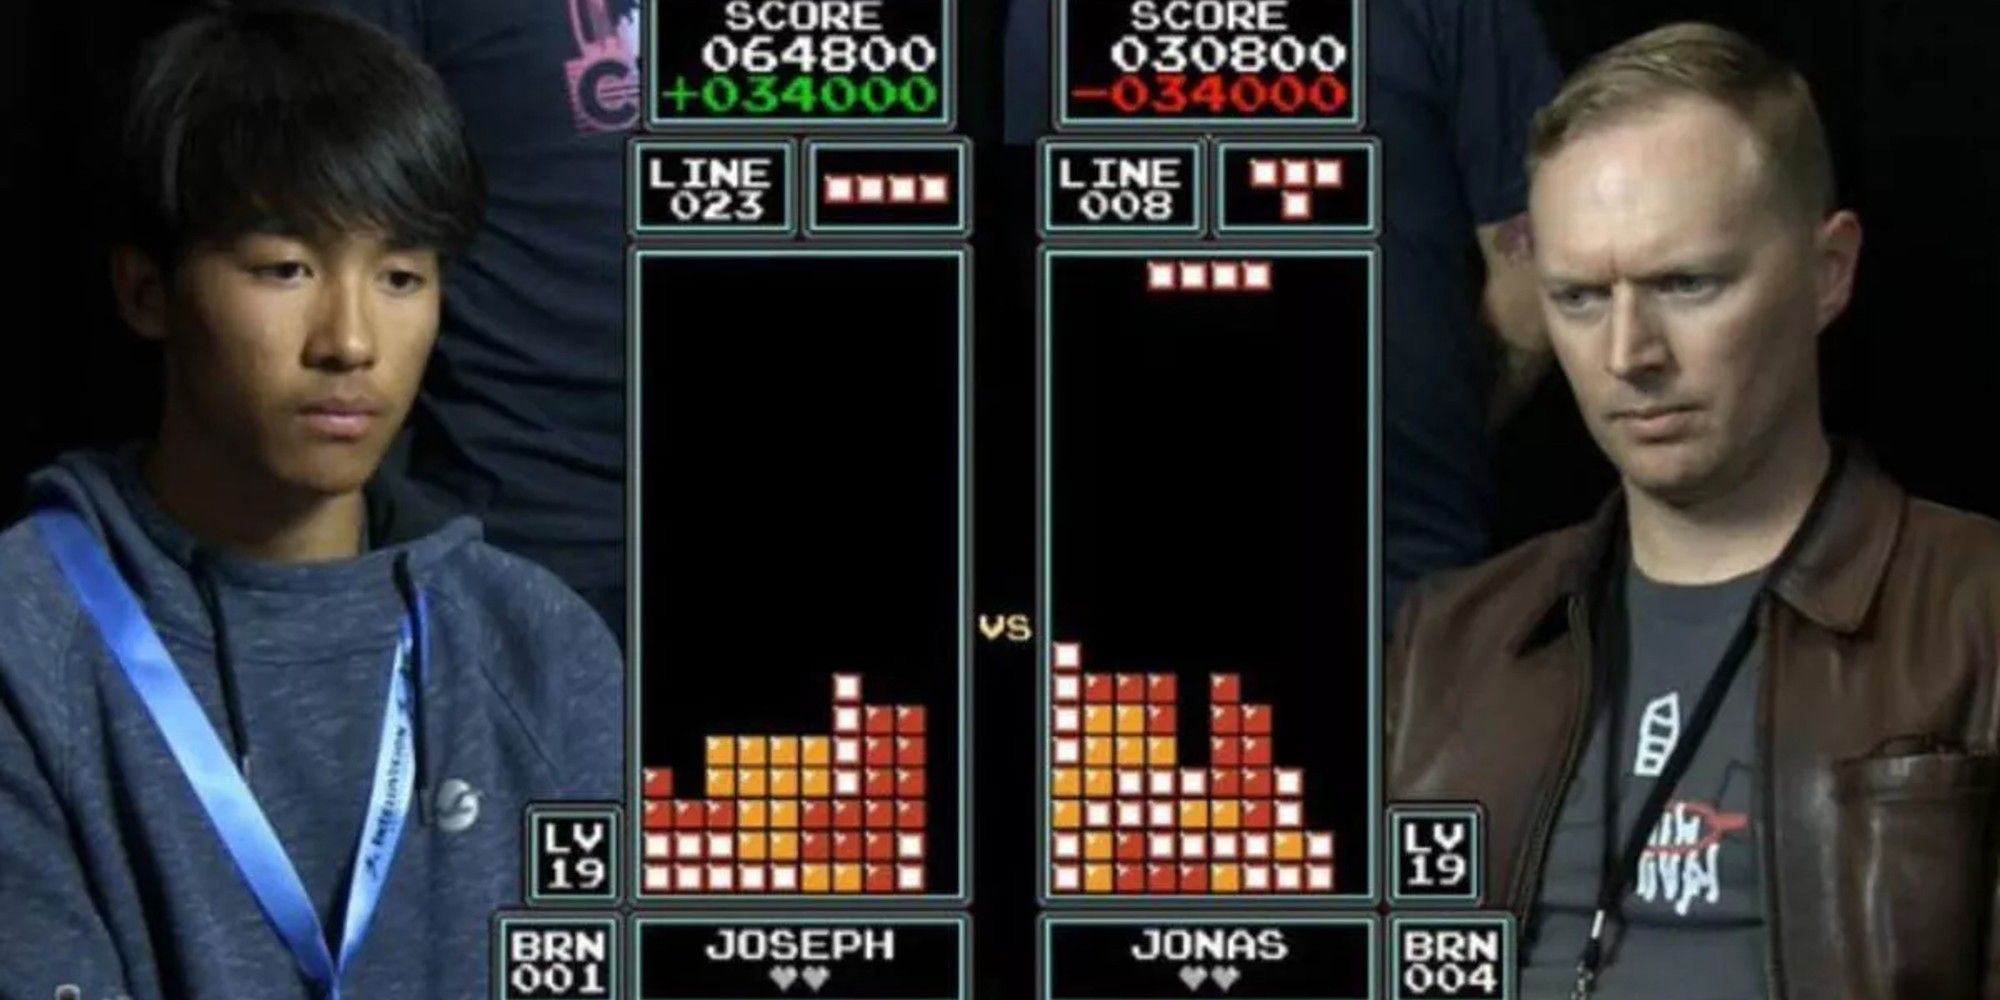 10 Tips For Classic Tetris Players